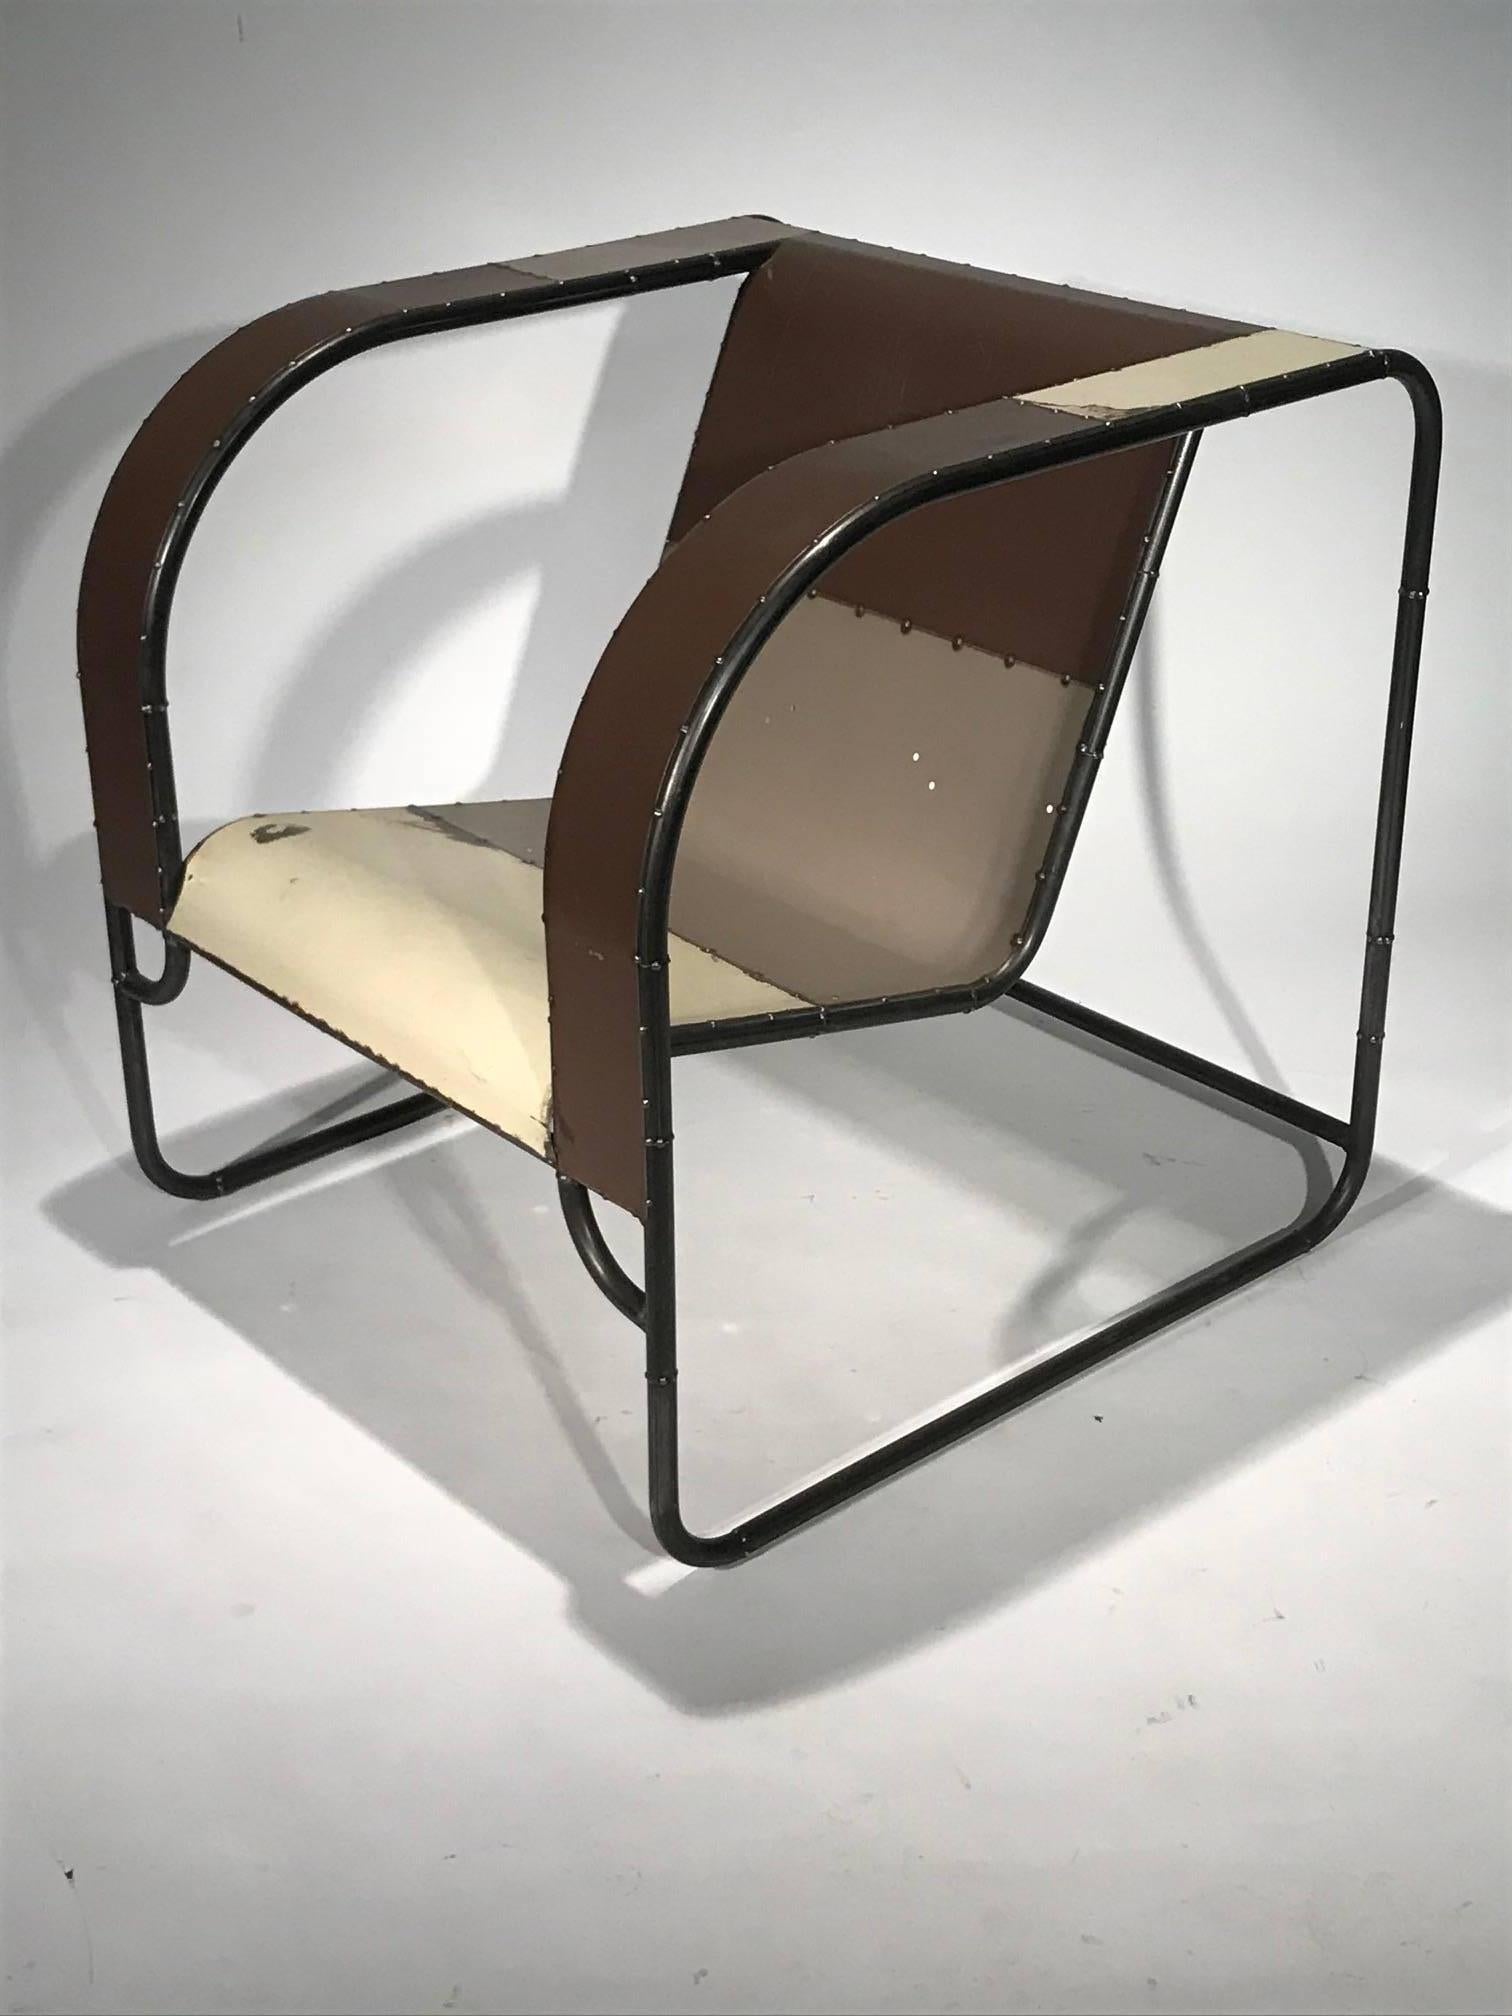 Club chair custom fabricated from reclaimed steel by Midwestern artist. Issued in a limited edition of 25.